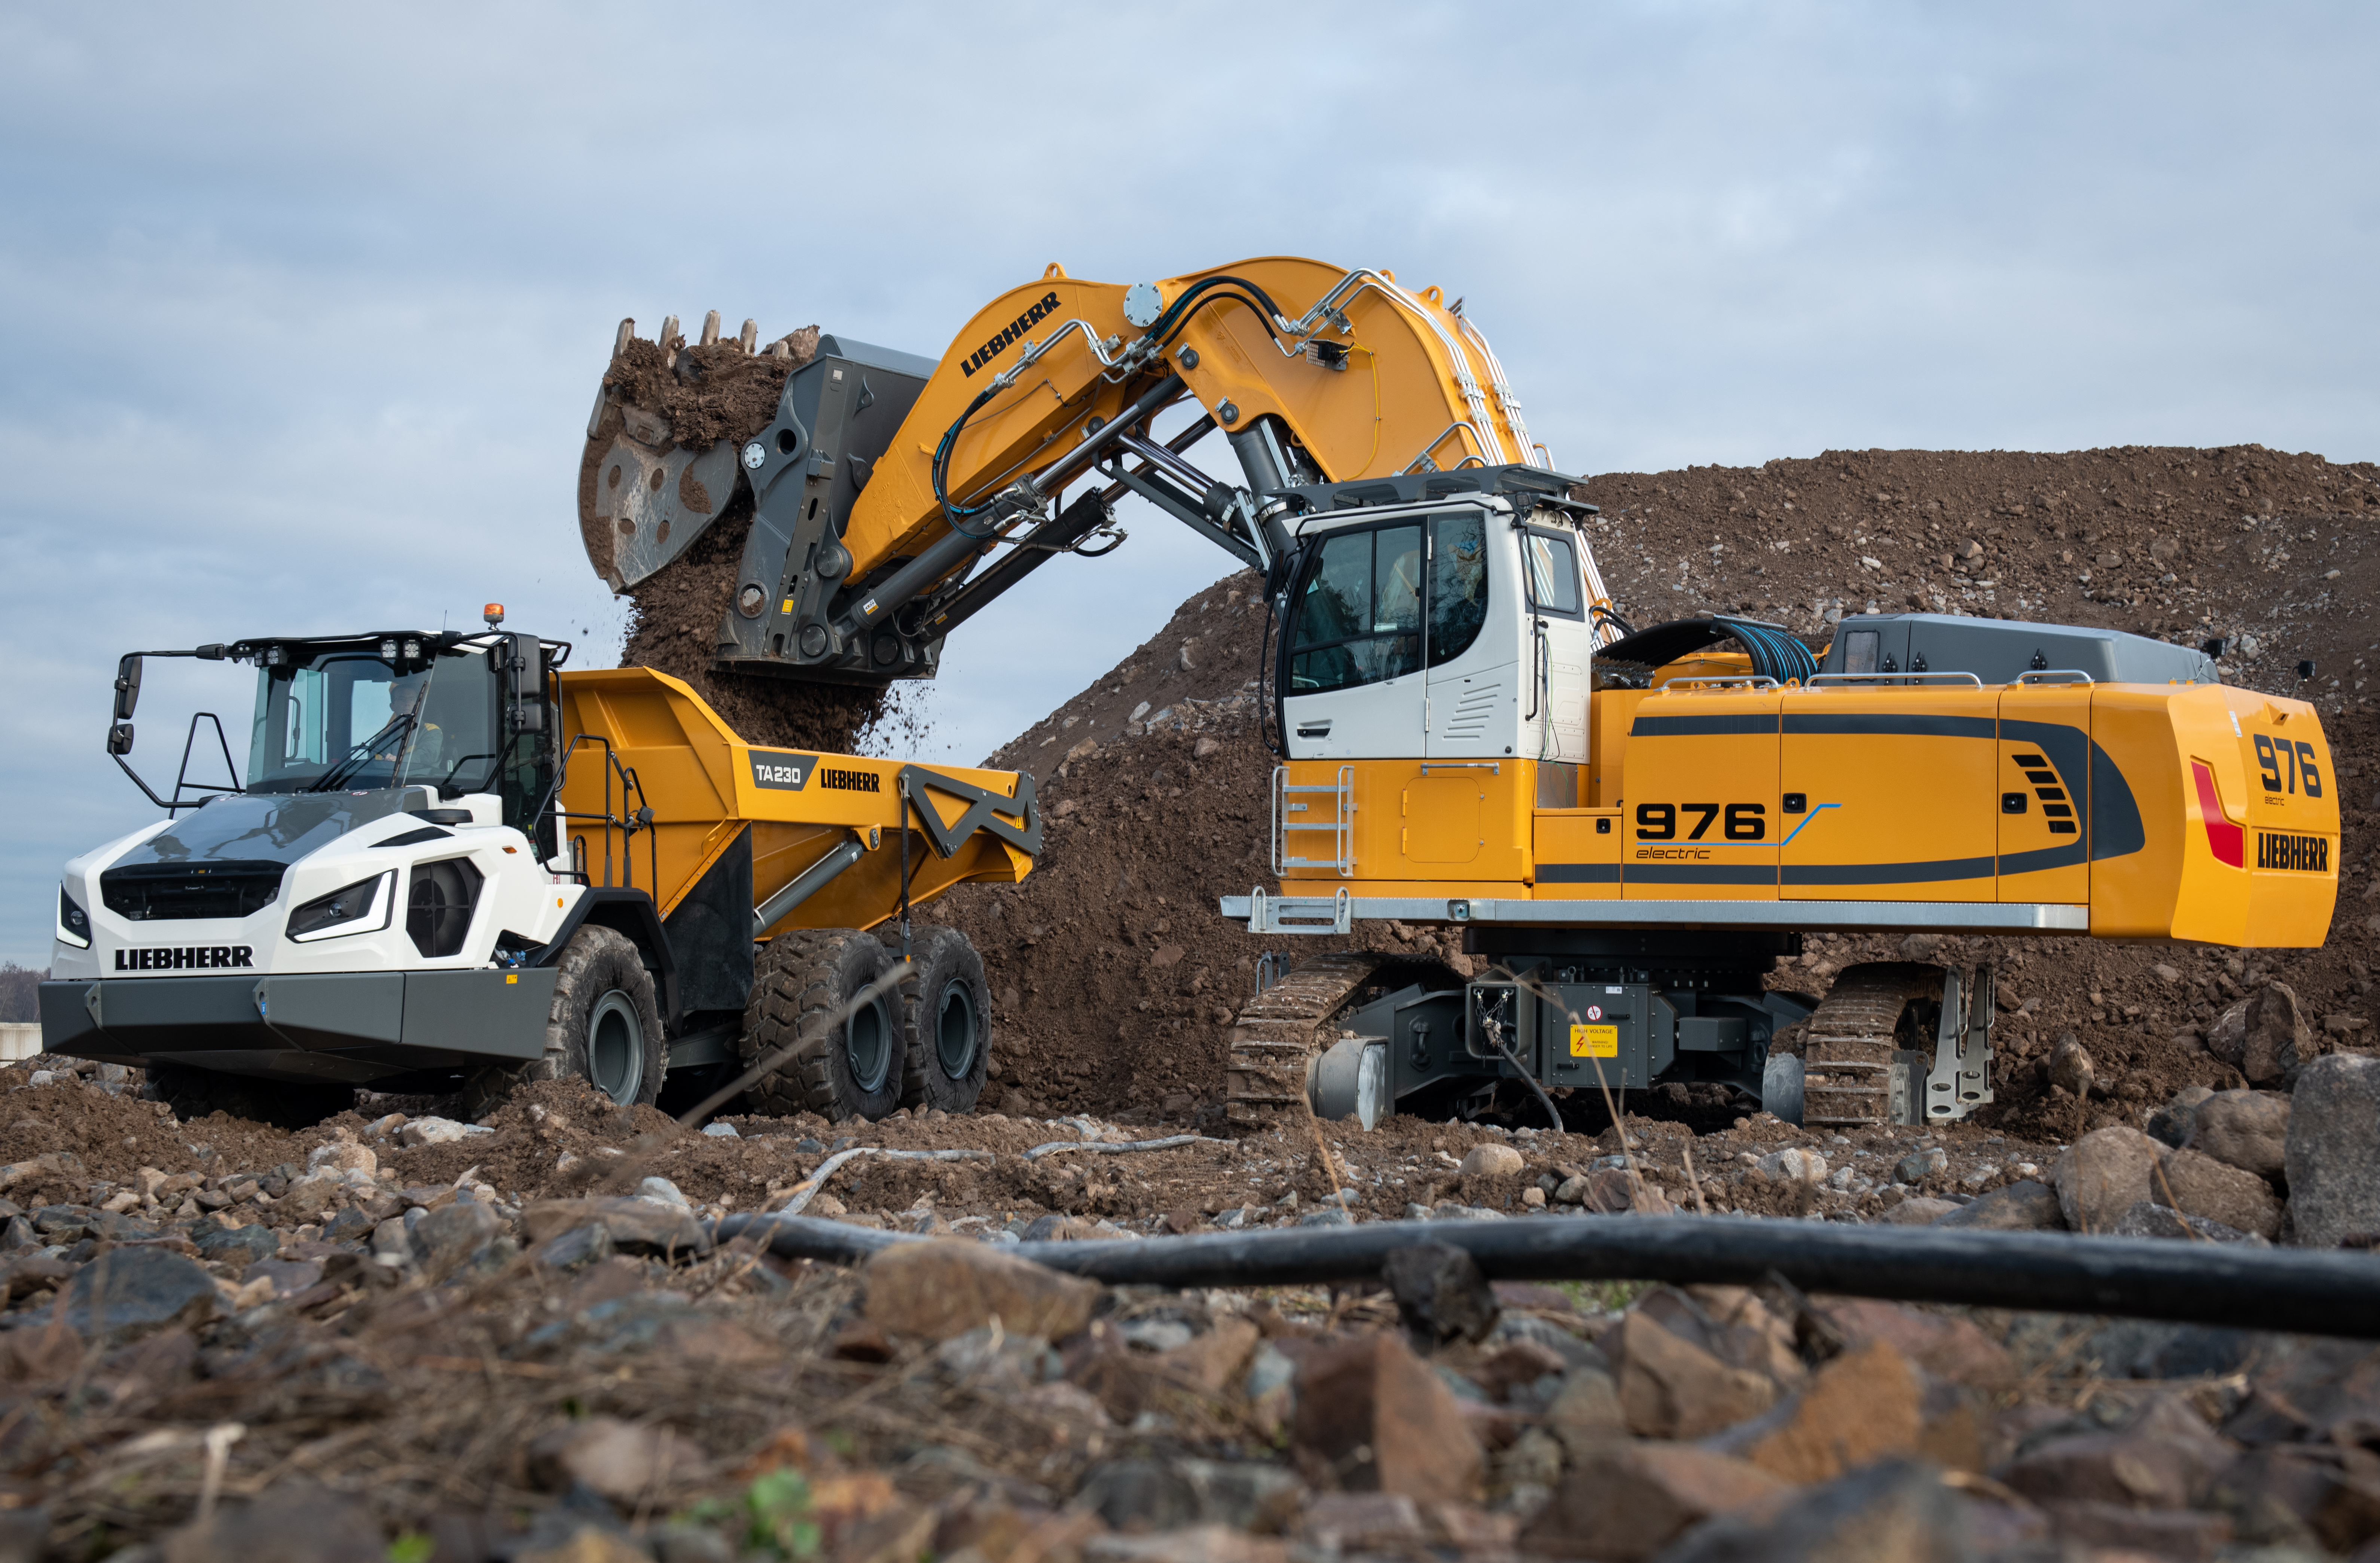 The Liebherr R 976-E electric crawler excavator replaces the ER 974 B for mine and quarry extraction.